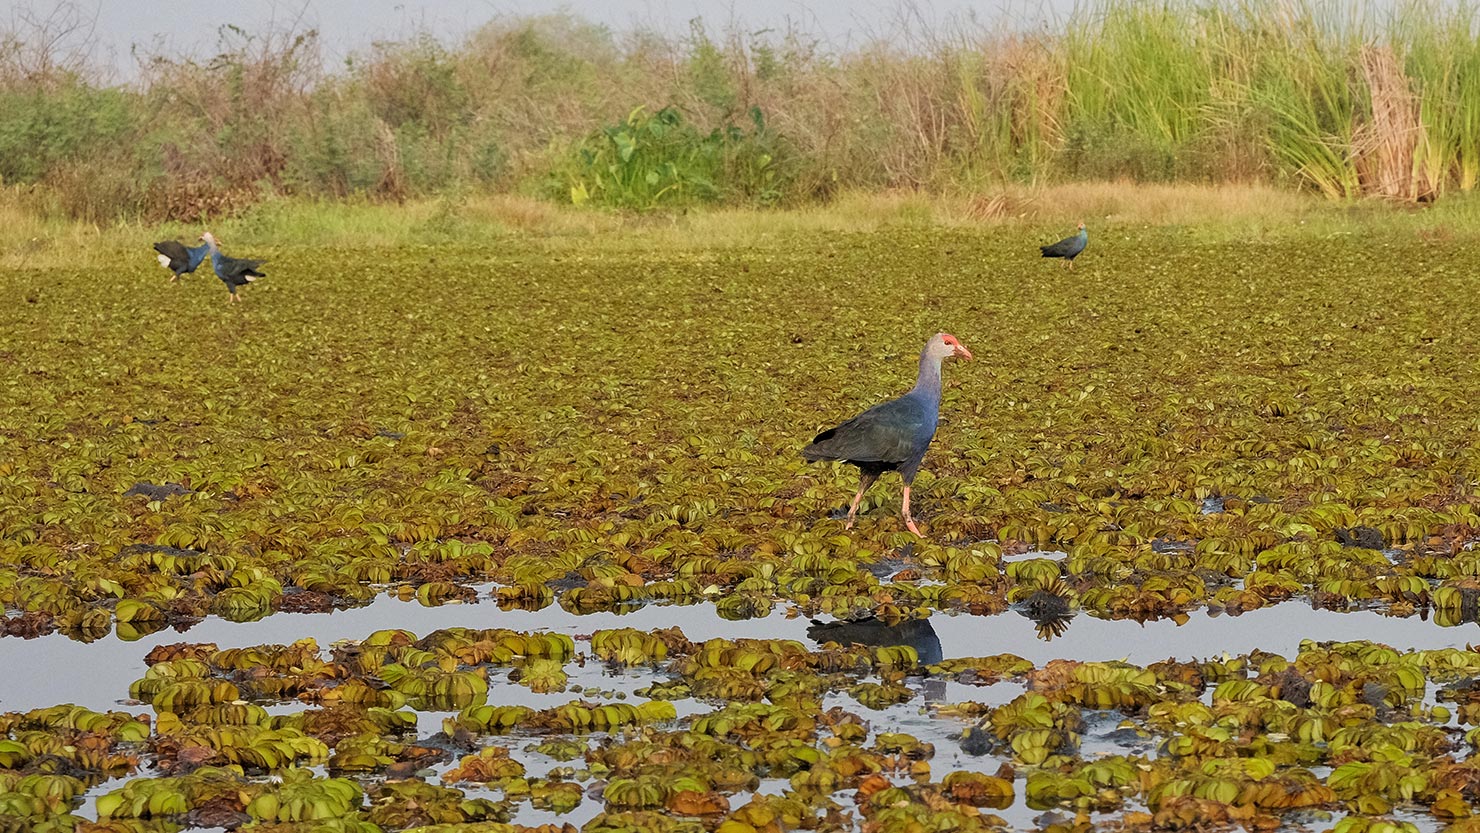 Gray-headed Swamphens walk on top of the vegetation that covers much of the lake